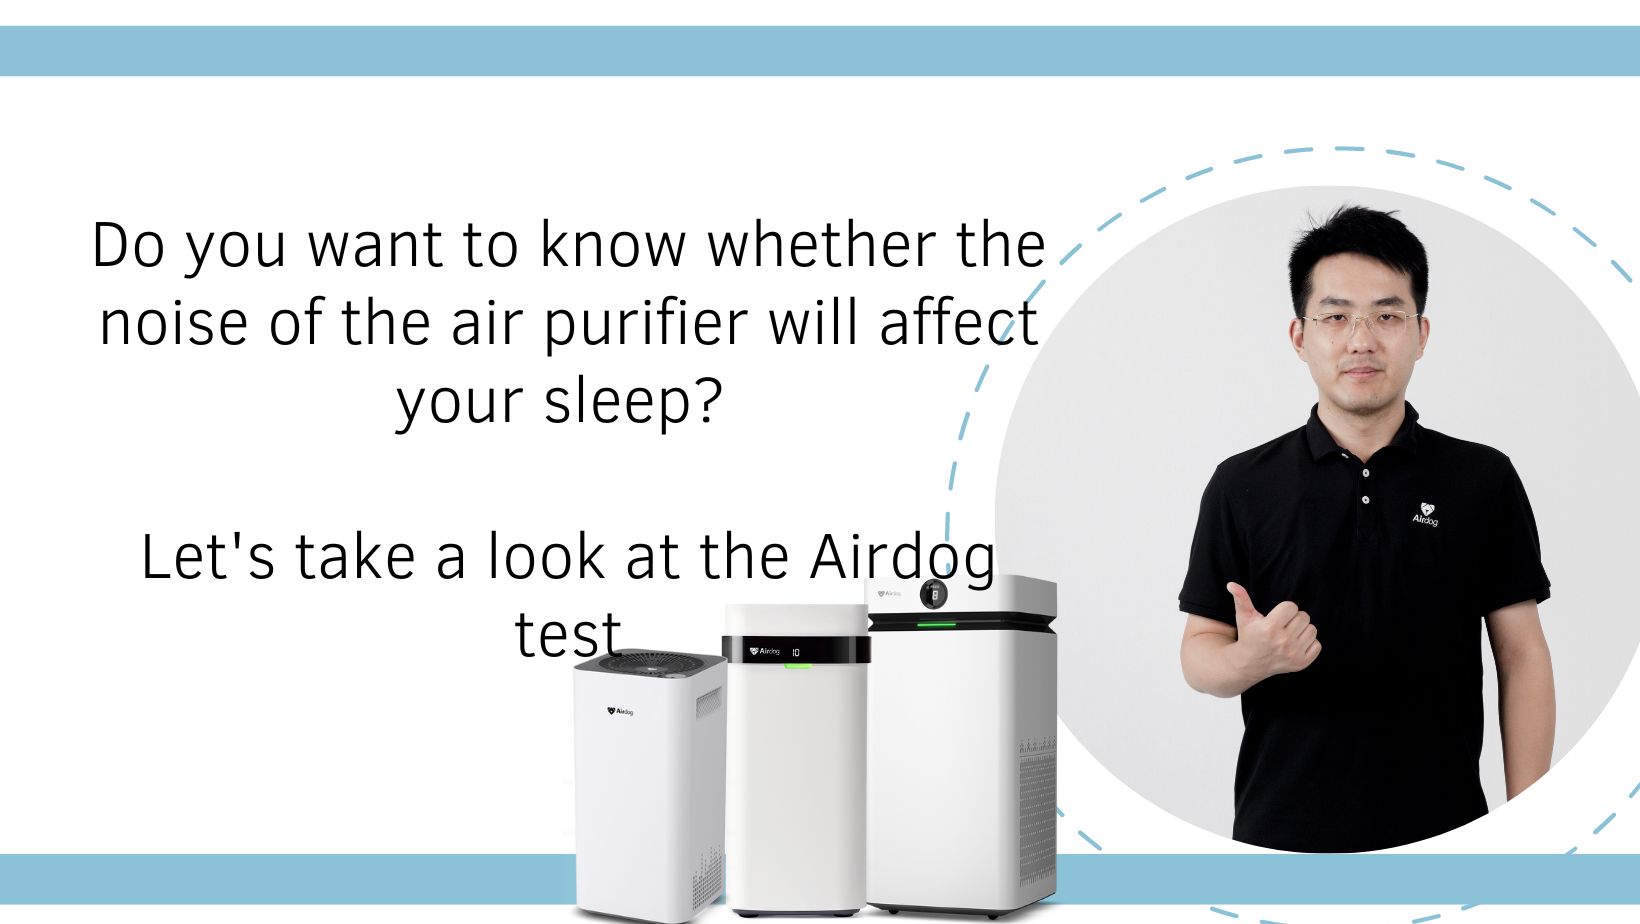 Noise level test of Airdog air purifier